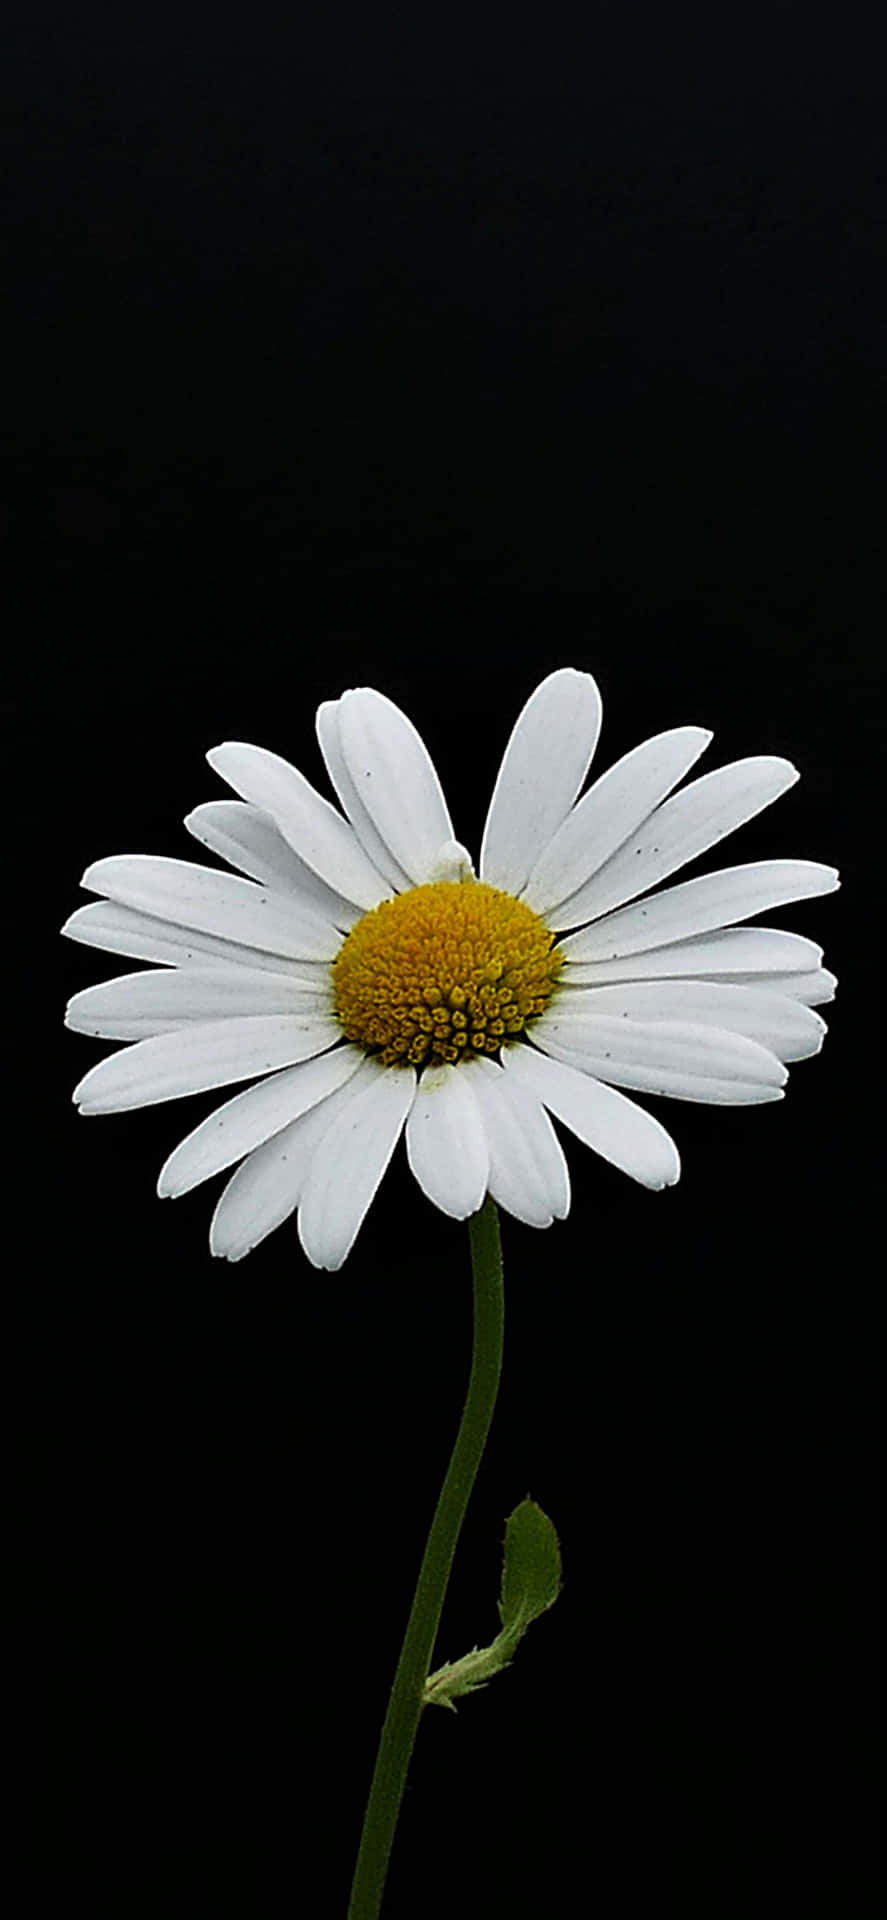 Black Canvas And White Daisy Flower Iphone Wallpaper